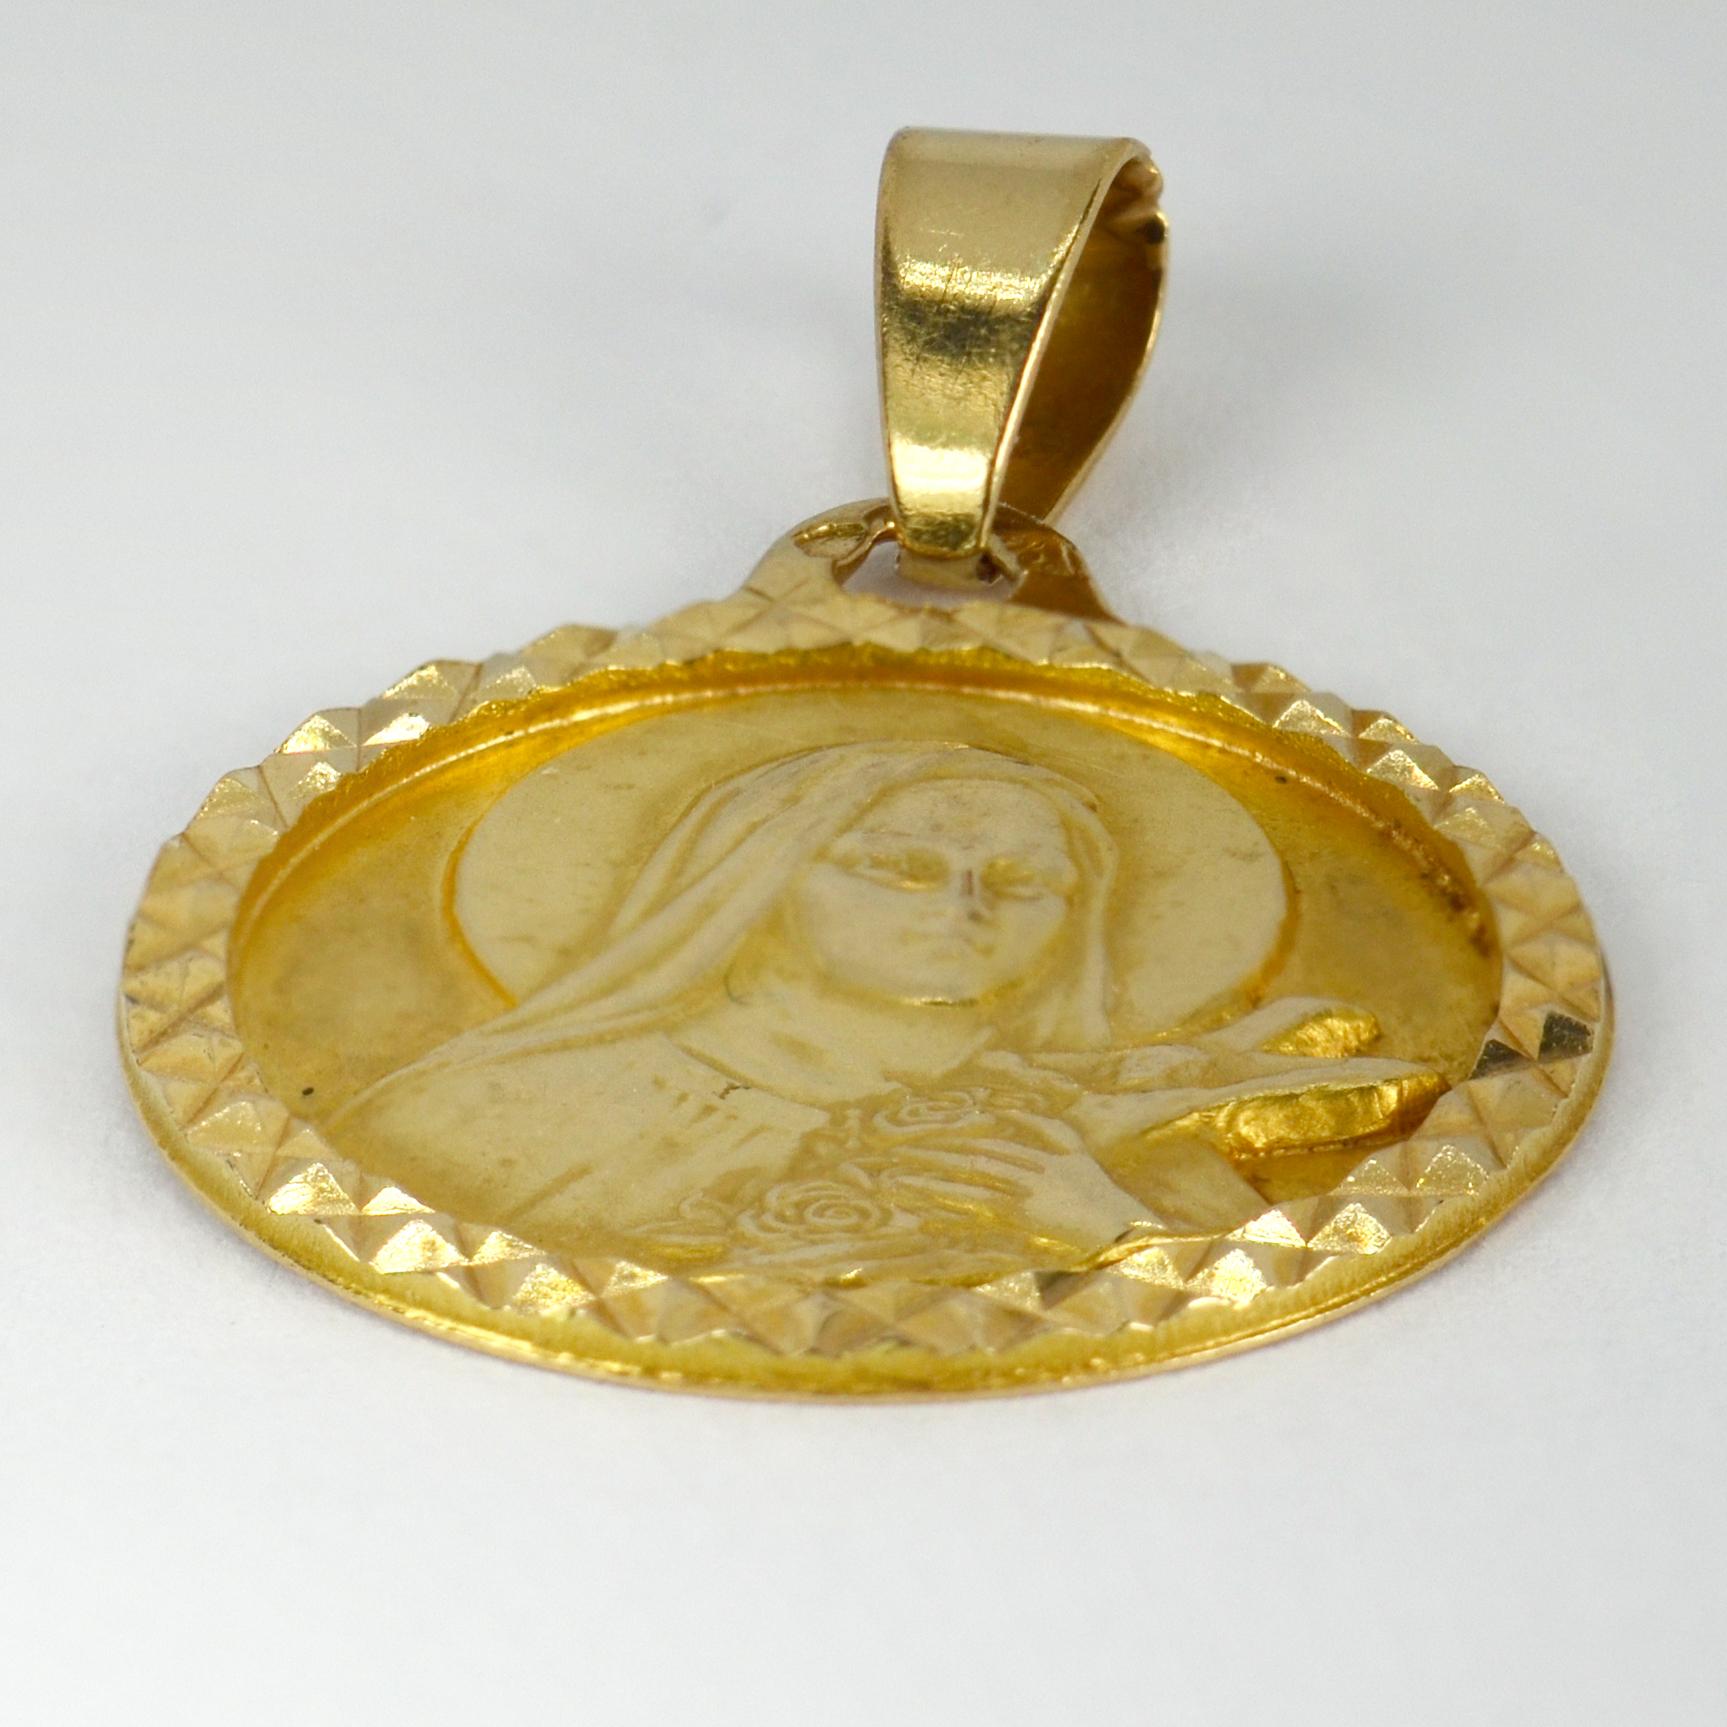 A French 18 karat (18K) yellow gold charm pendant designed as a medal depicting Saint Therese with a halo holding a crucifix and some roses, the frame faceted to give further visual interest. Stamped with the eagles head for 18 karat gold and French